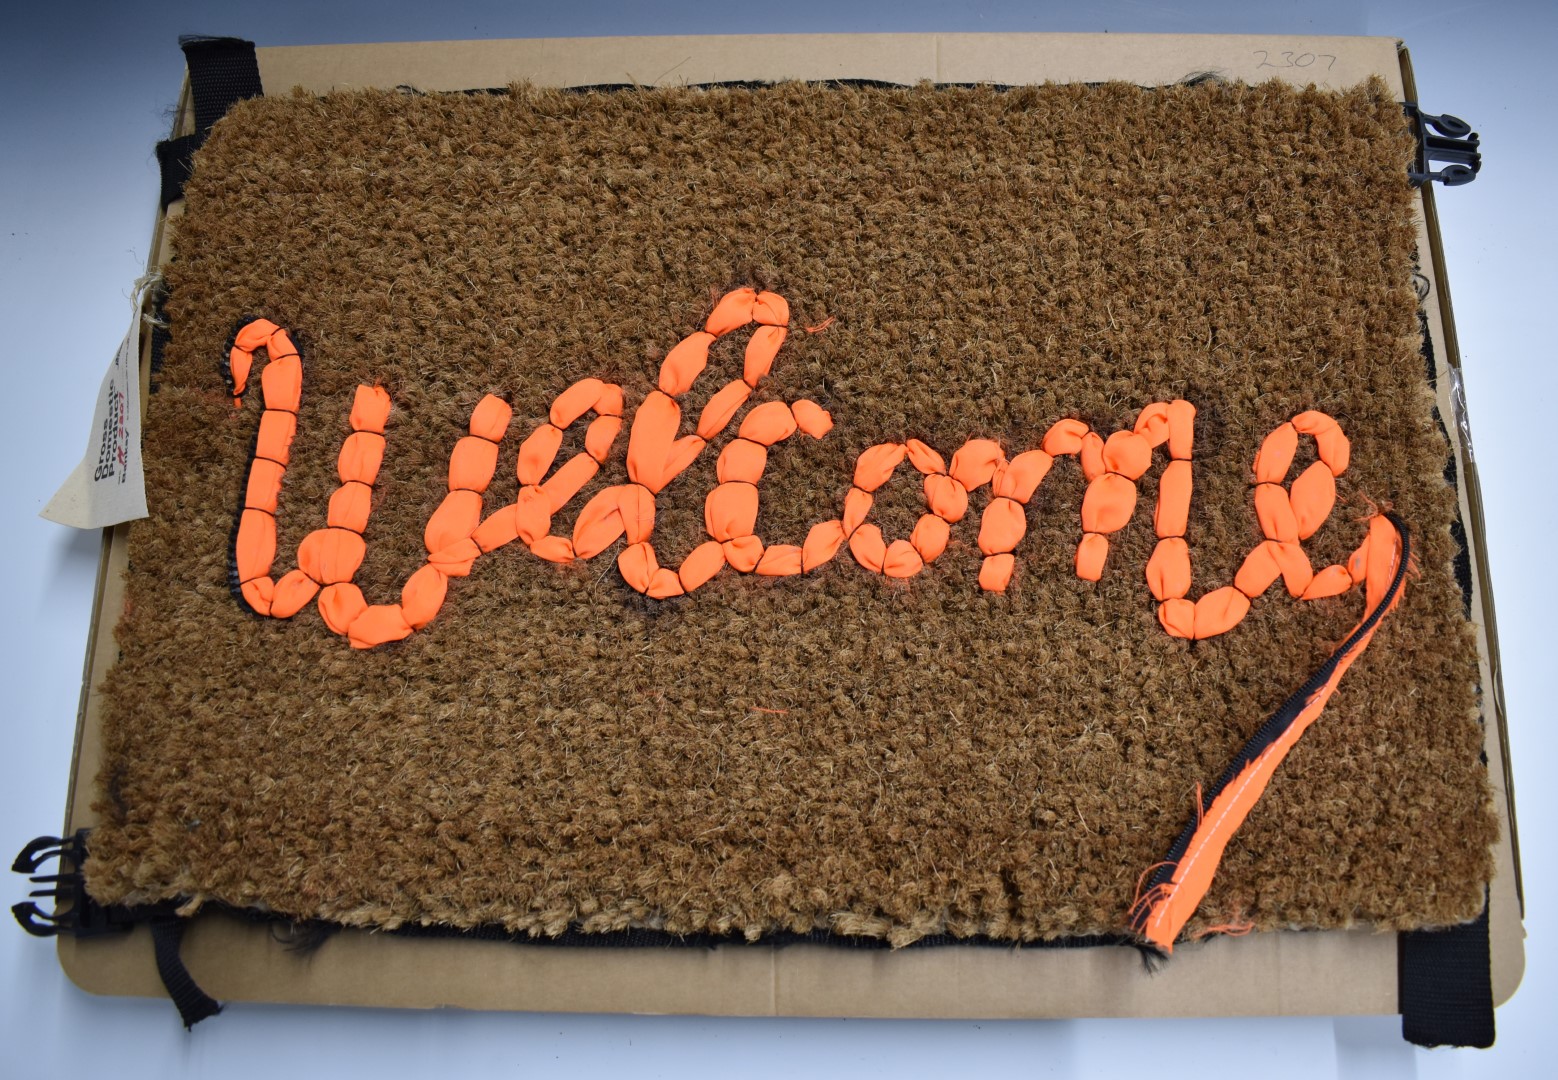 Banksy Welcome doormat, in original Love Welcomes box with Gross Domestic Product label, produced in